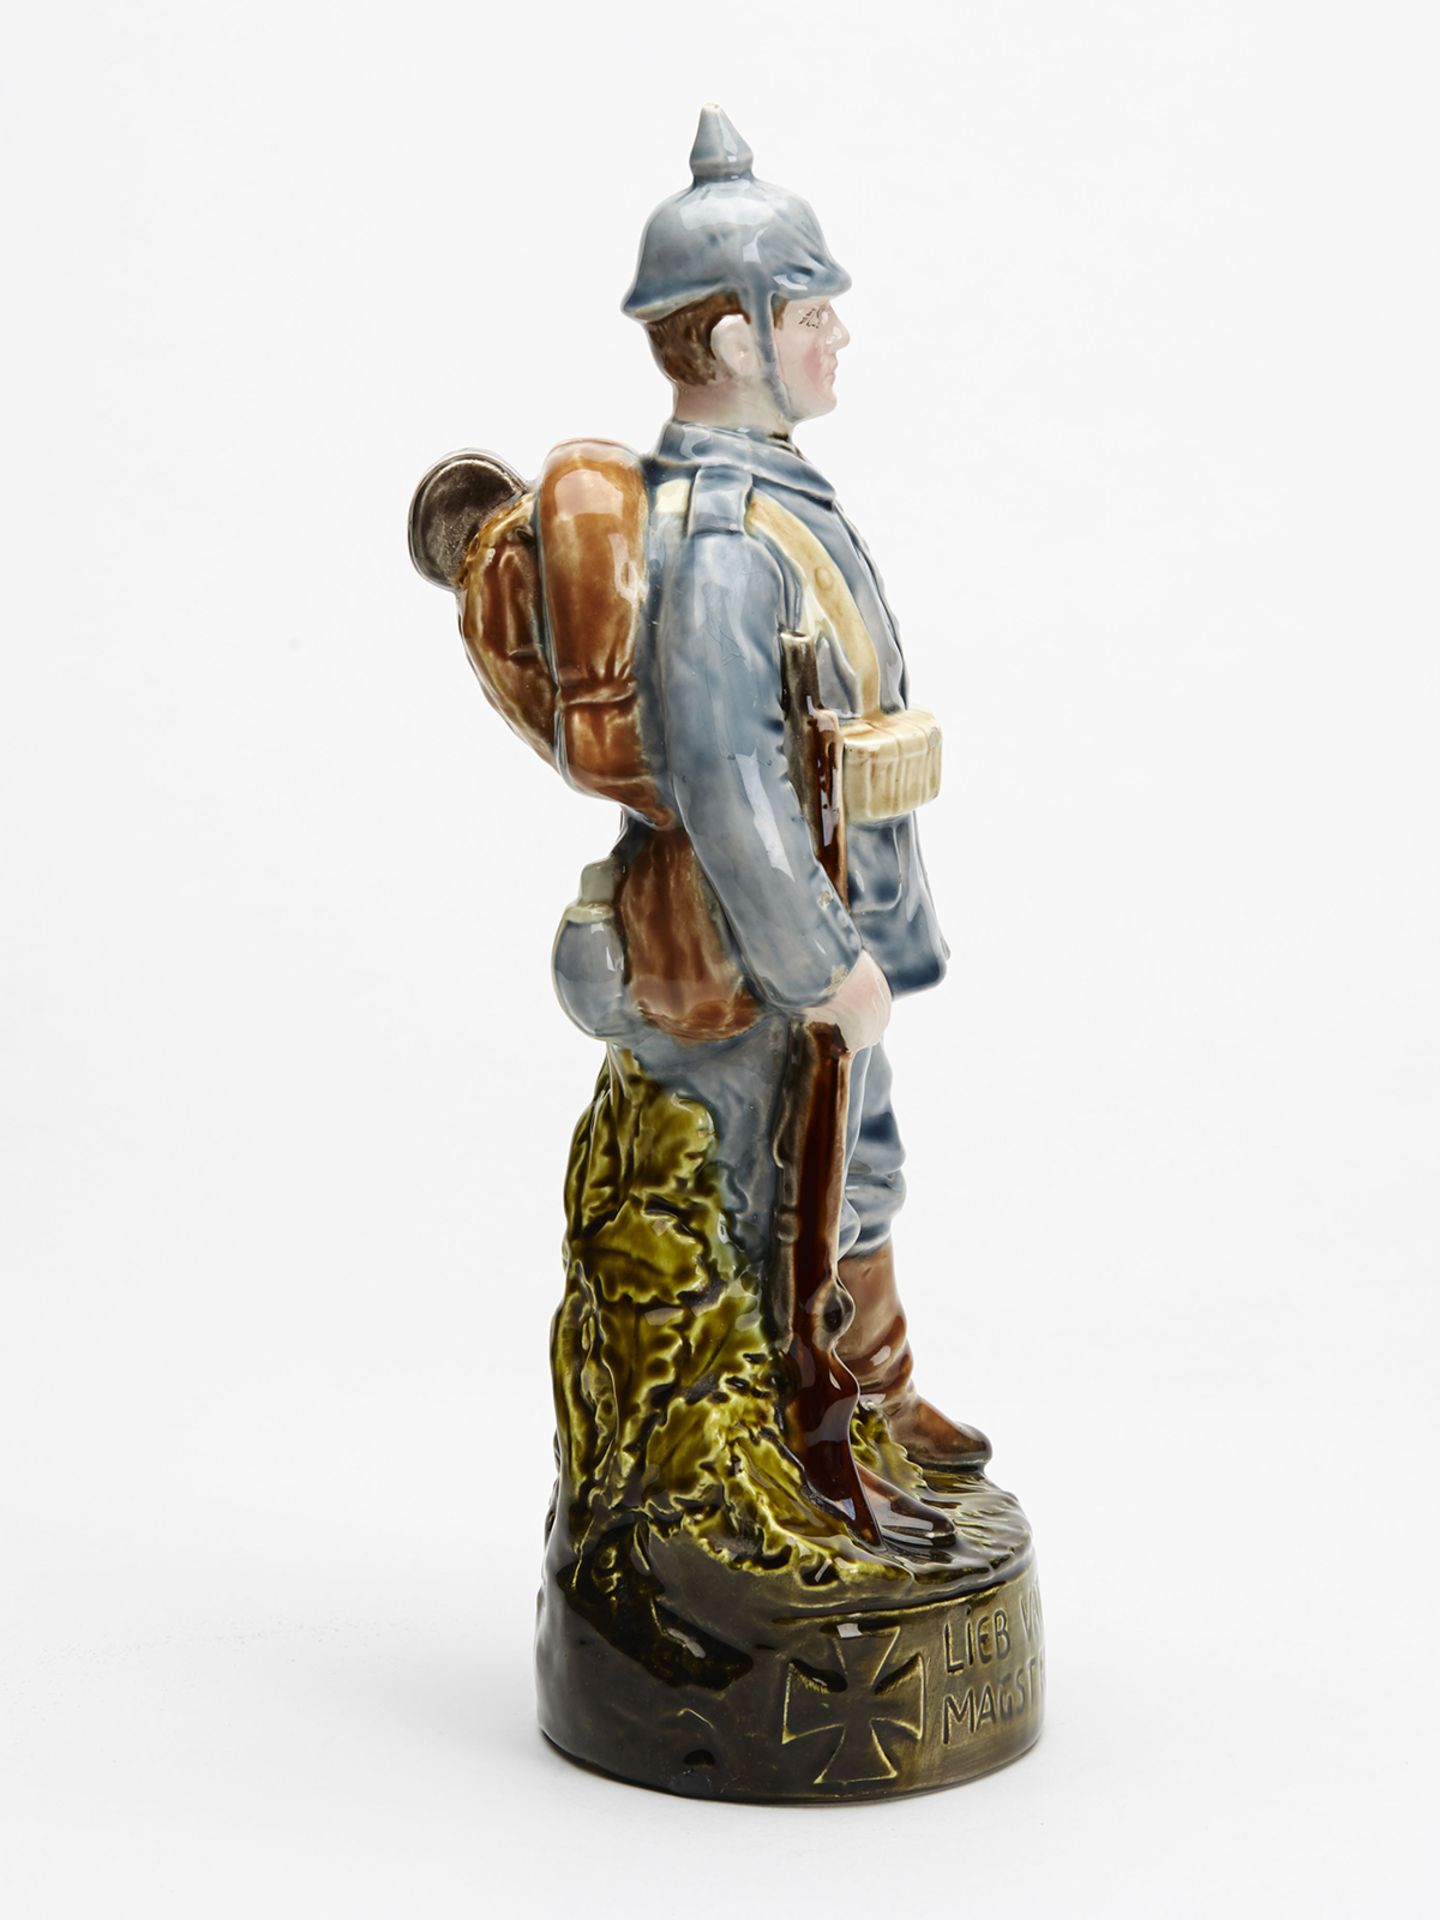 Rare Majolica German Infantry Soldier Figure 19Th C. - Image 2 of 10